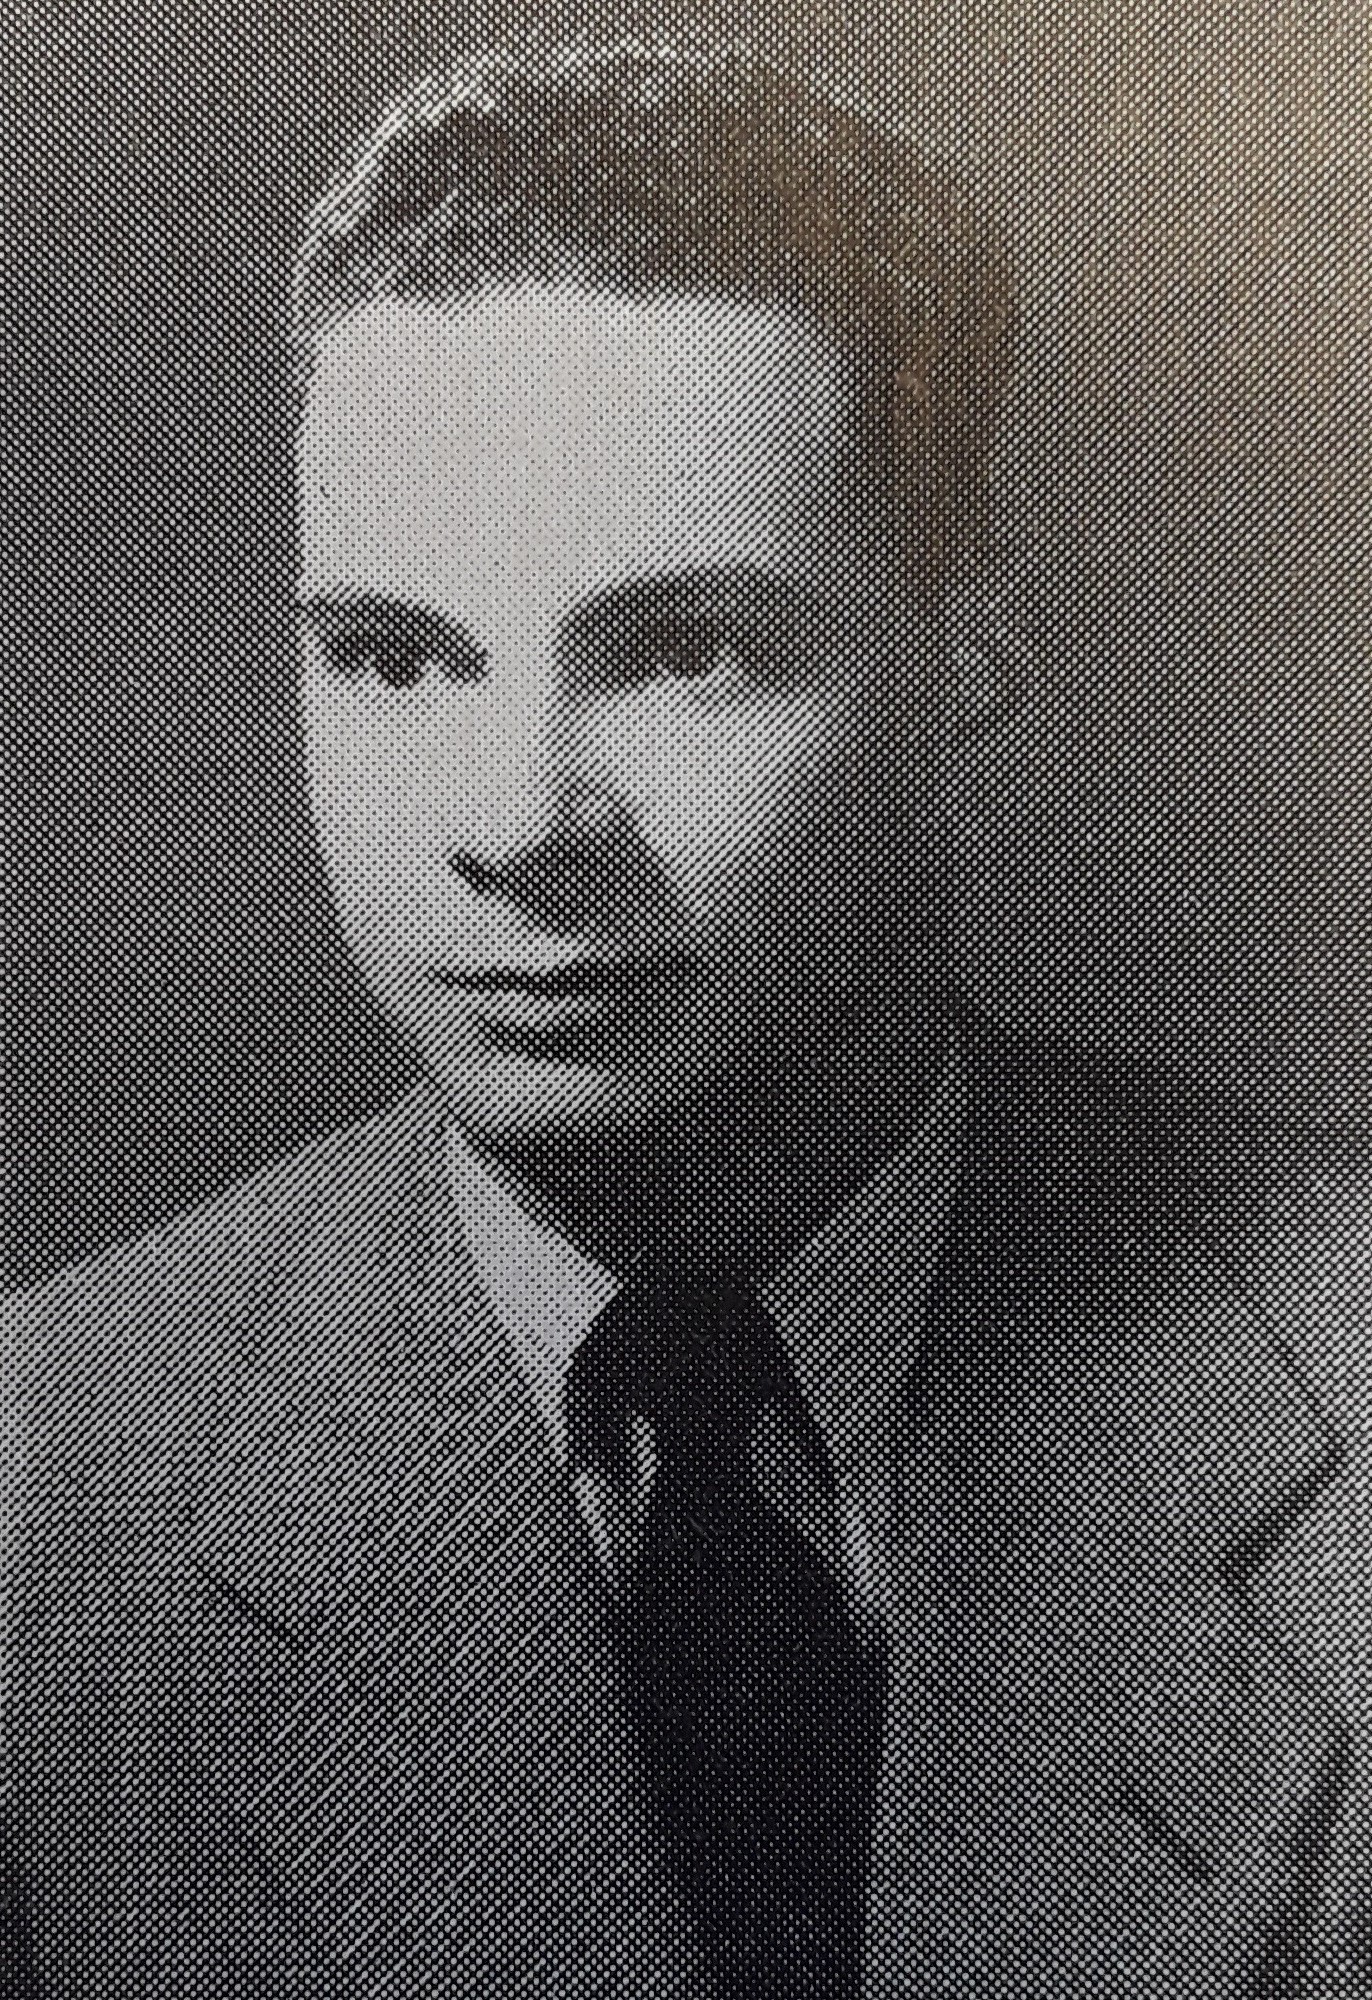 yearbook-photo-pierro-cropped